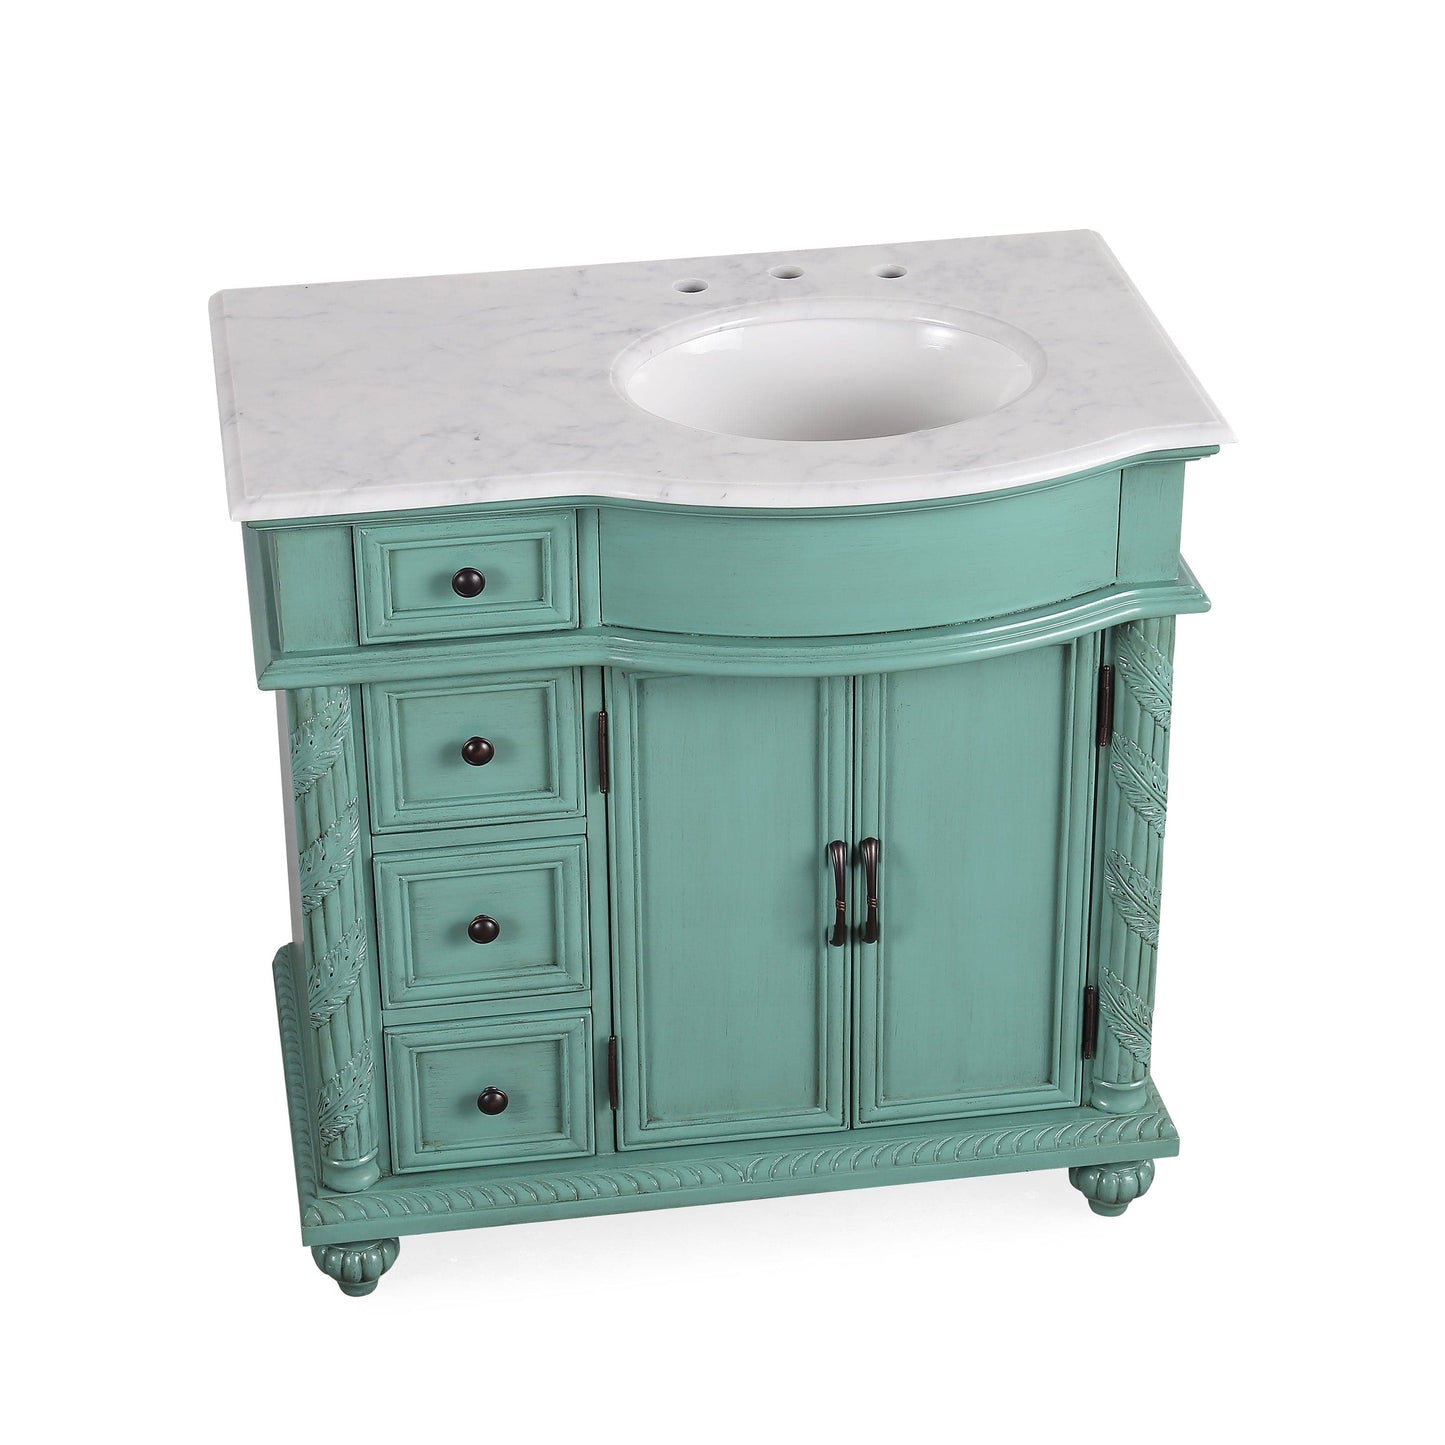 Silkroad Exclusive Silkroad Exclusive 36” Right Single Sink Green Bathroom Vanity with White Marble Top V0213NW36R